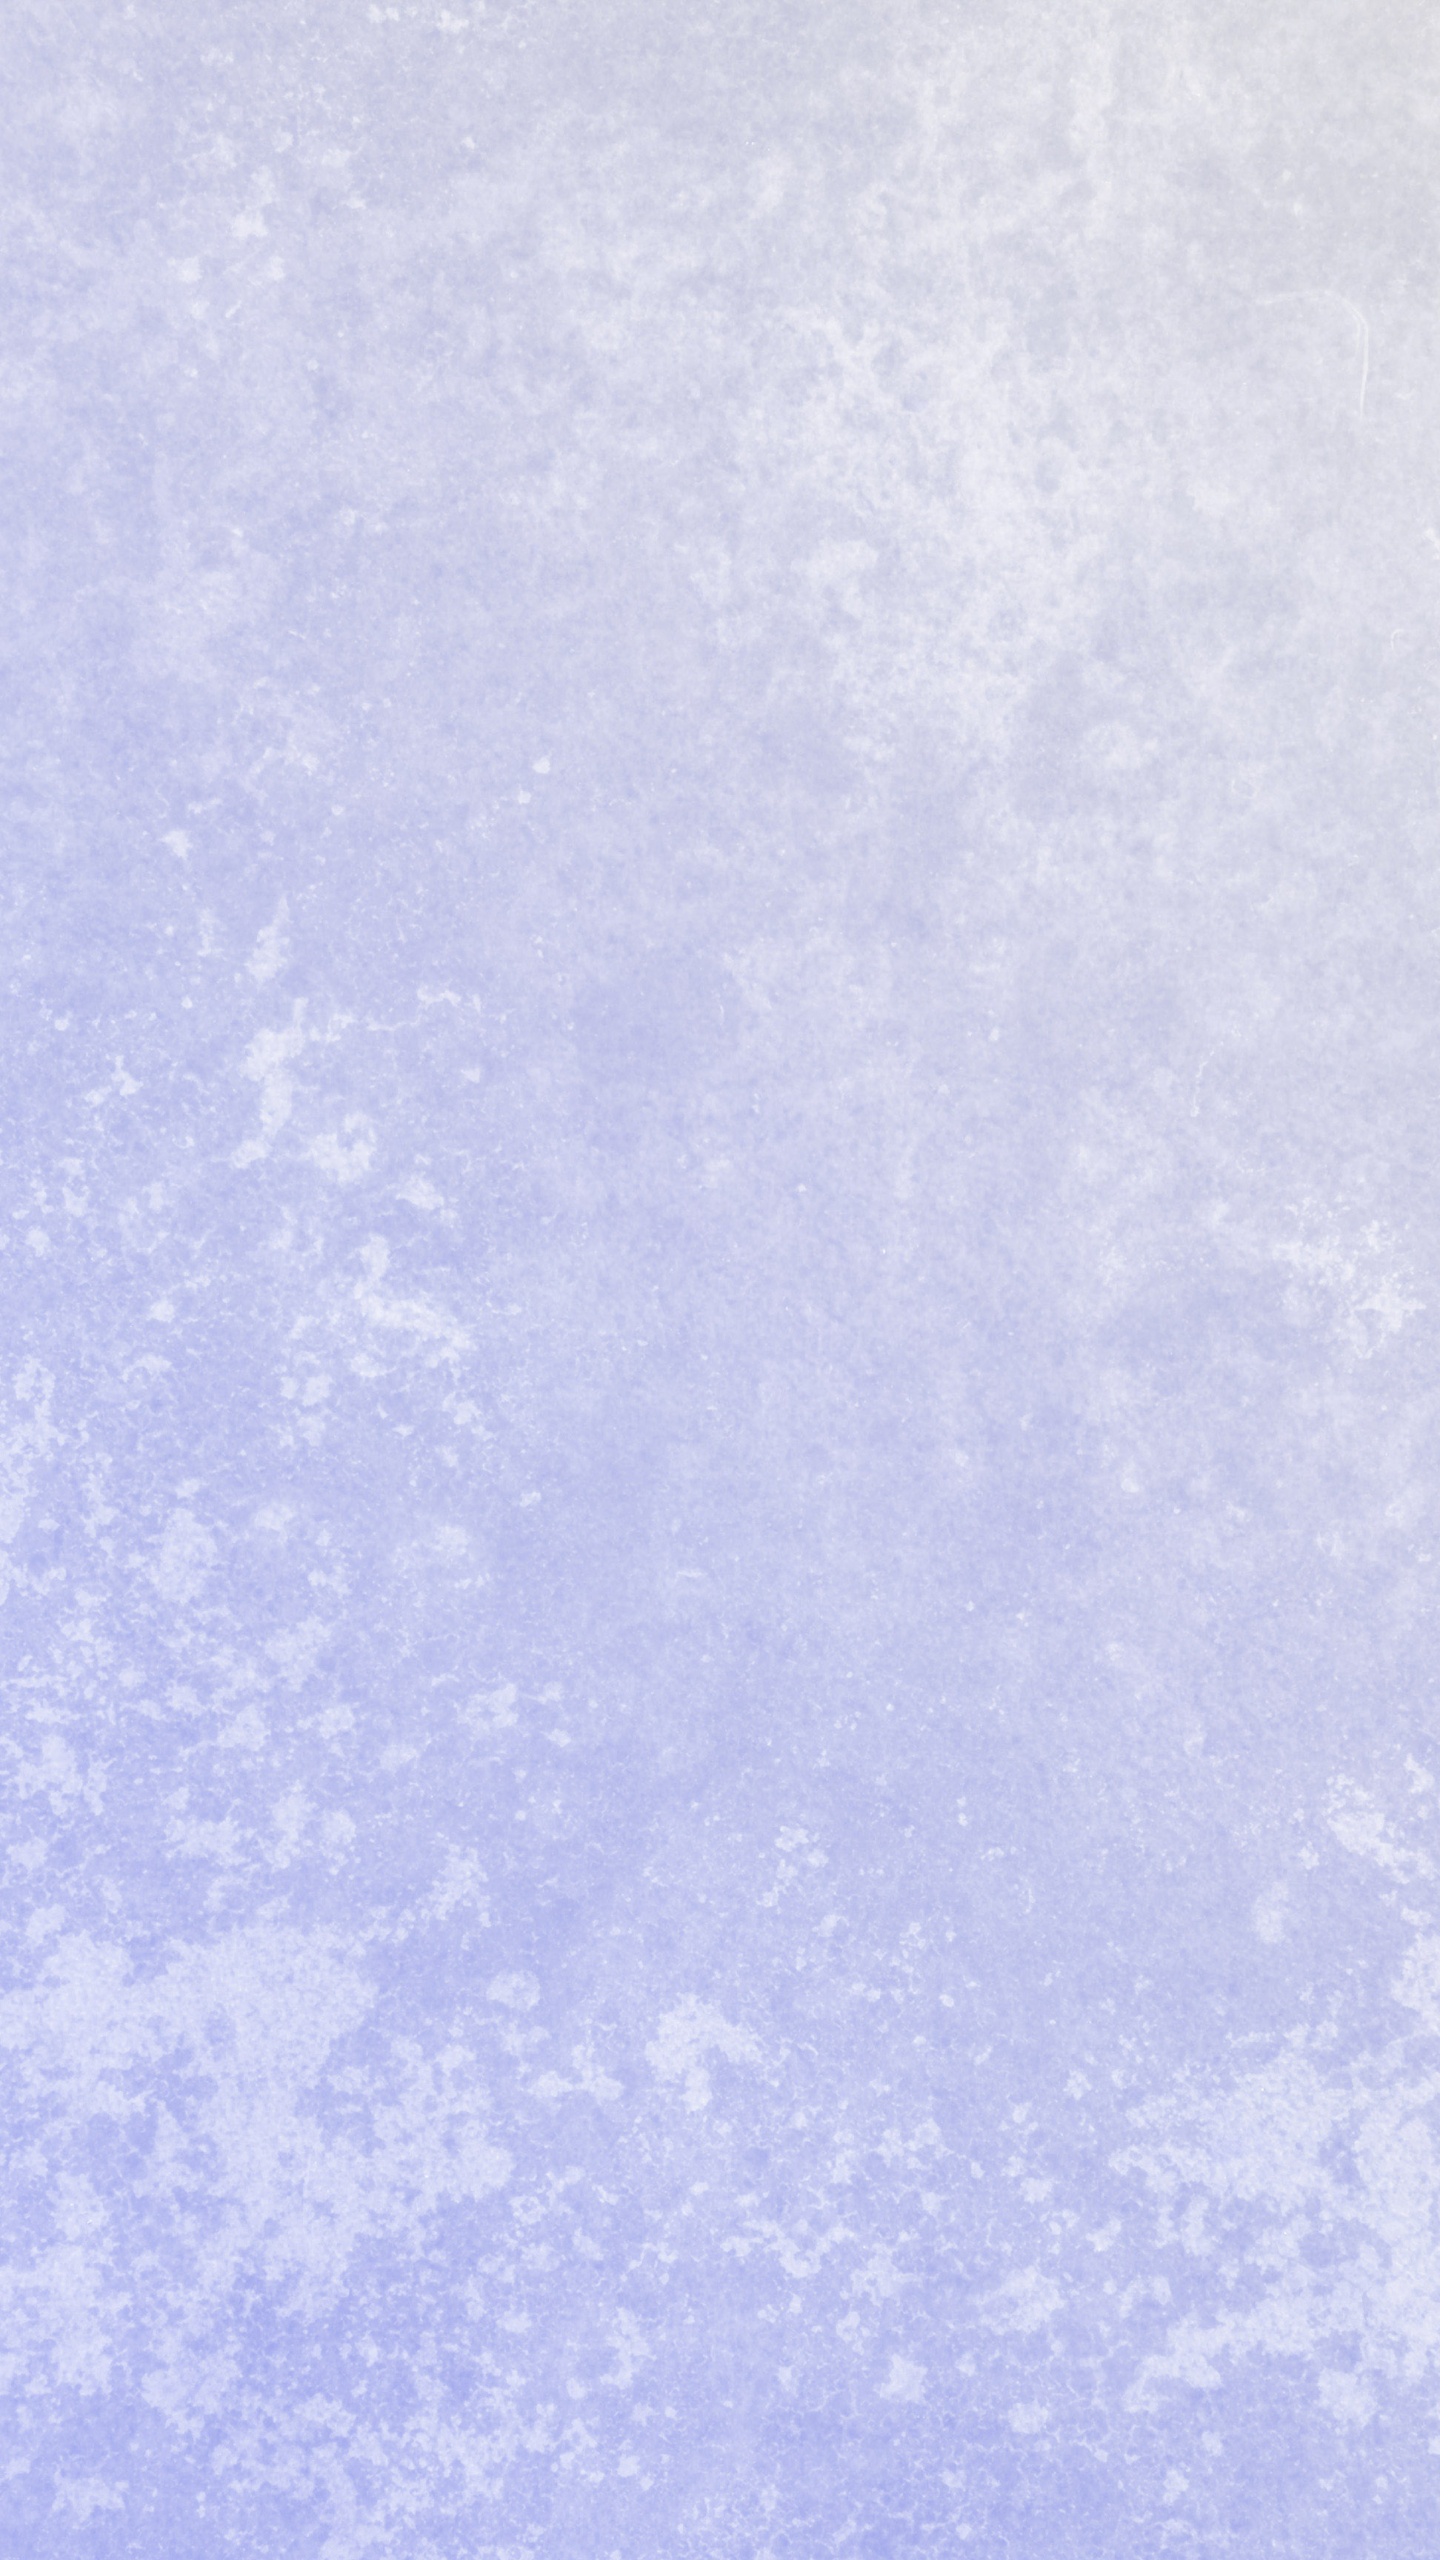 Blue Textile With White Paint. Wallpaper in 1440x2560 Resolution